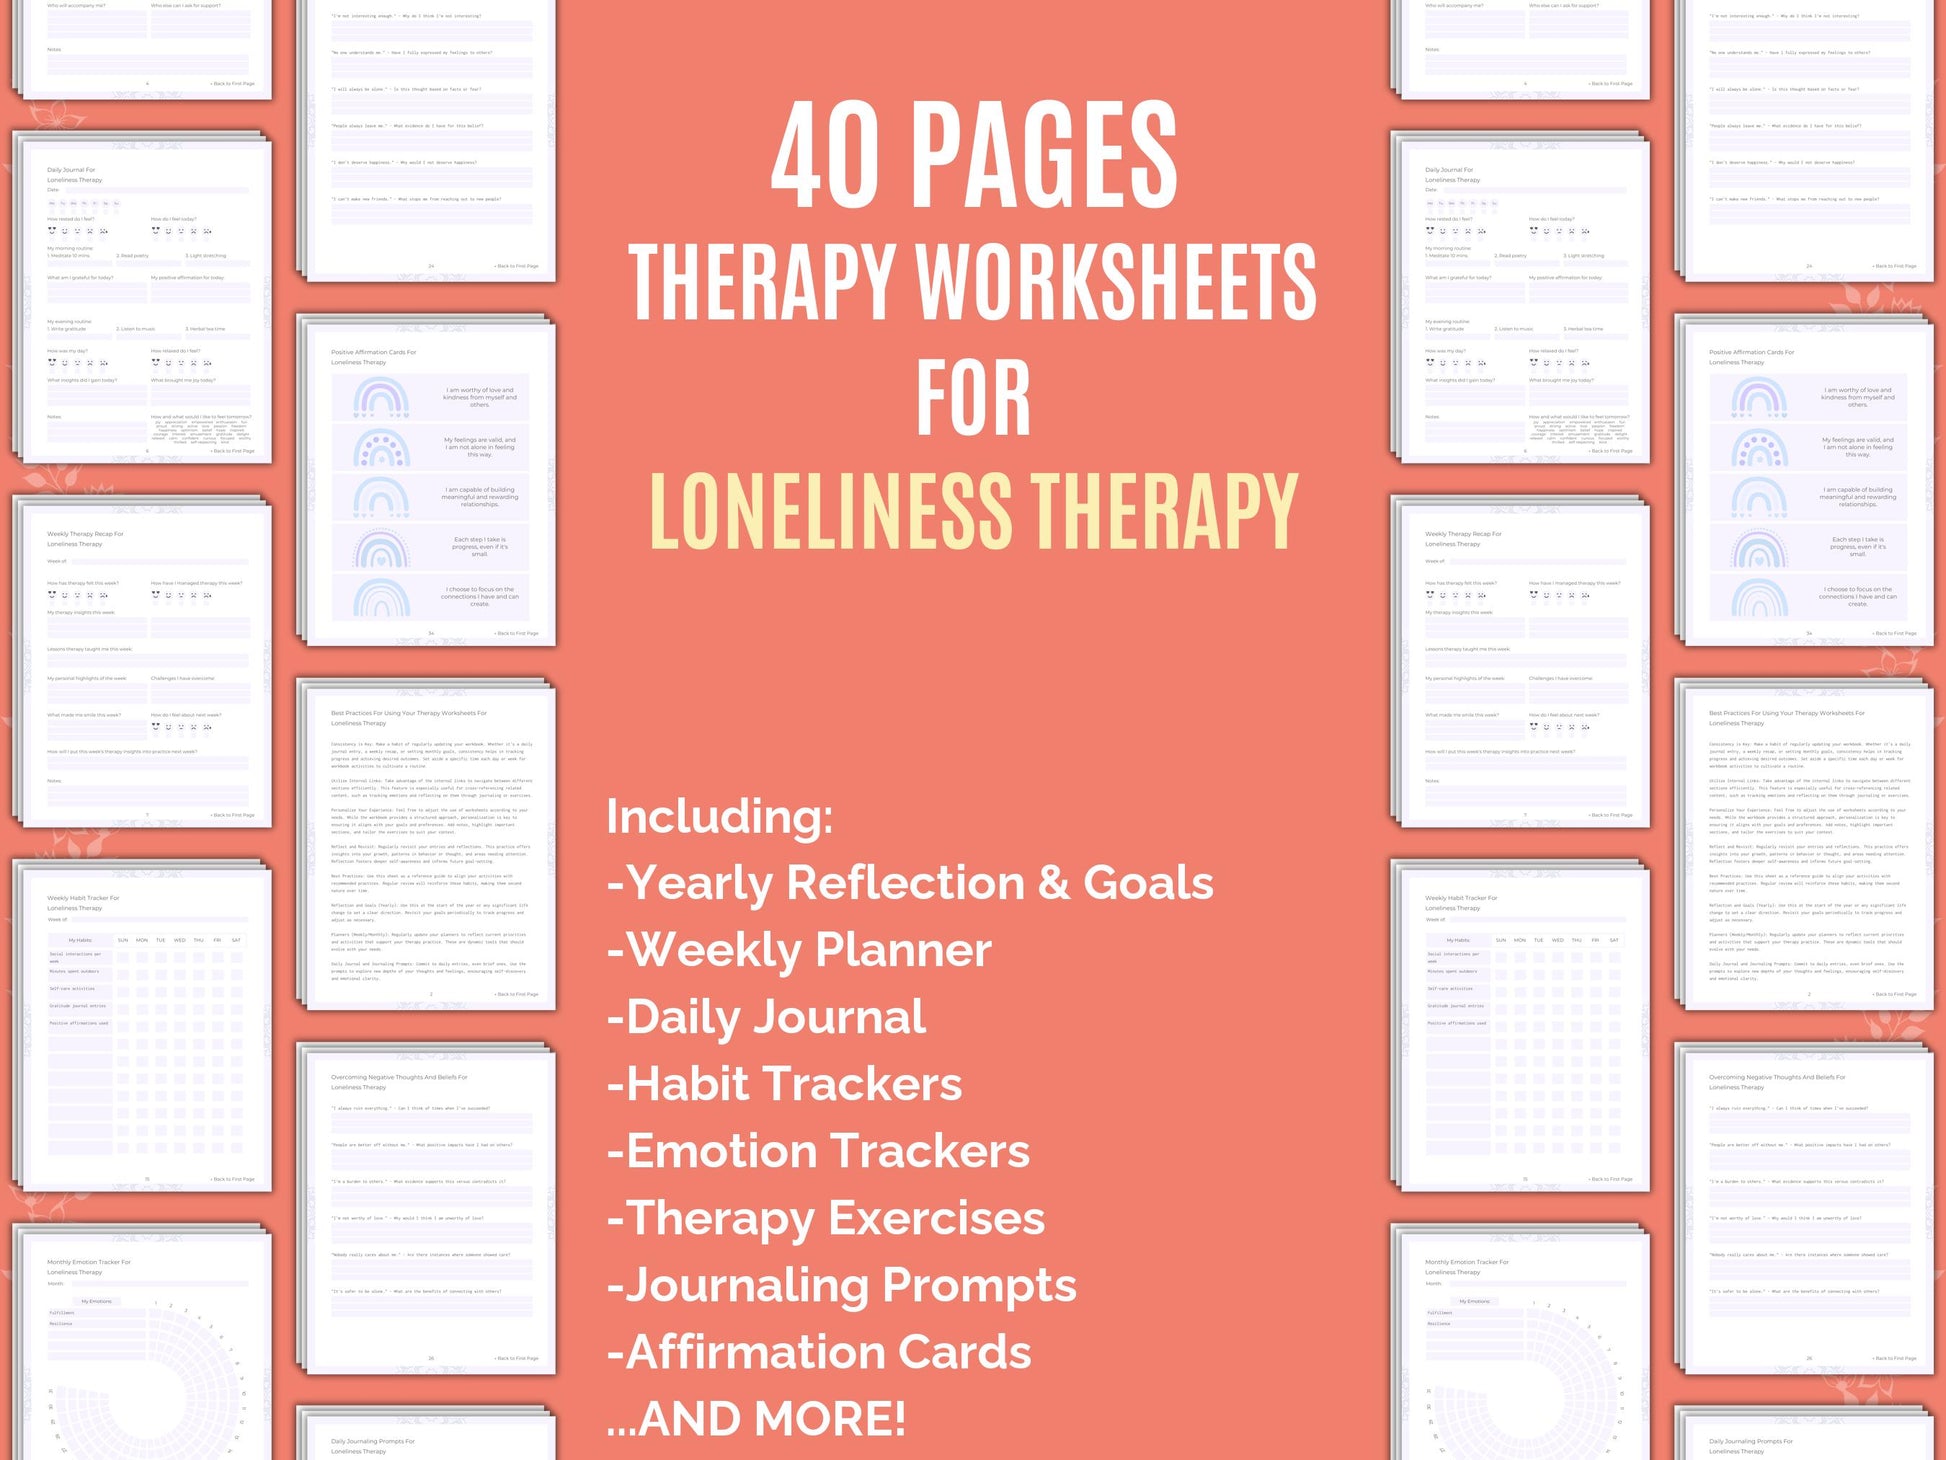 Counseling, Cheat Sheet, Goal Setting, Loneliness Notes, Loneliness Therapy, Loneliness Workbooks, Loneliness Resources, Loneliness Templates, Loneliness Planners, Journaling, Loneliness Journals, Loneliness Tools